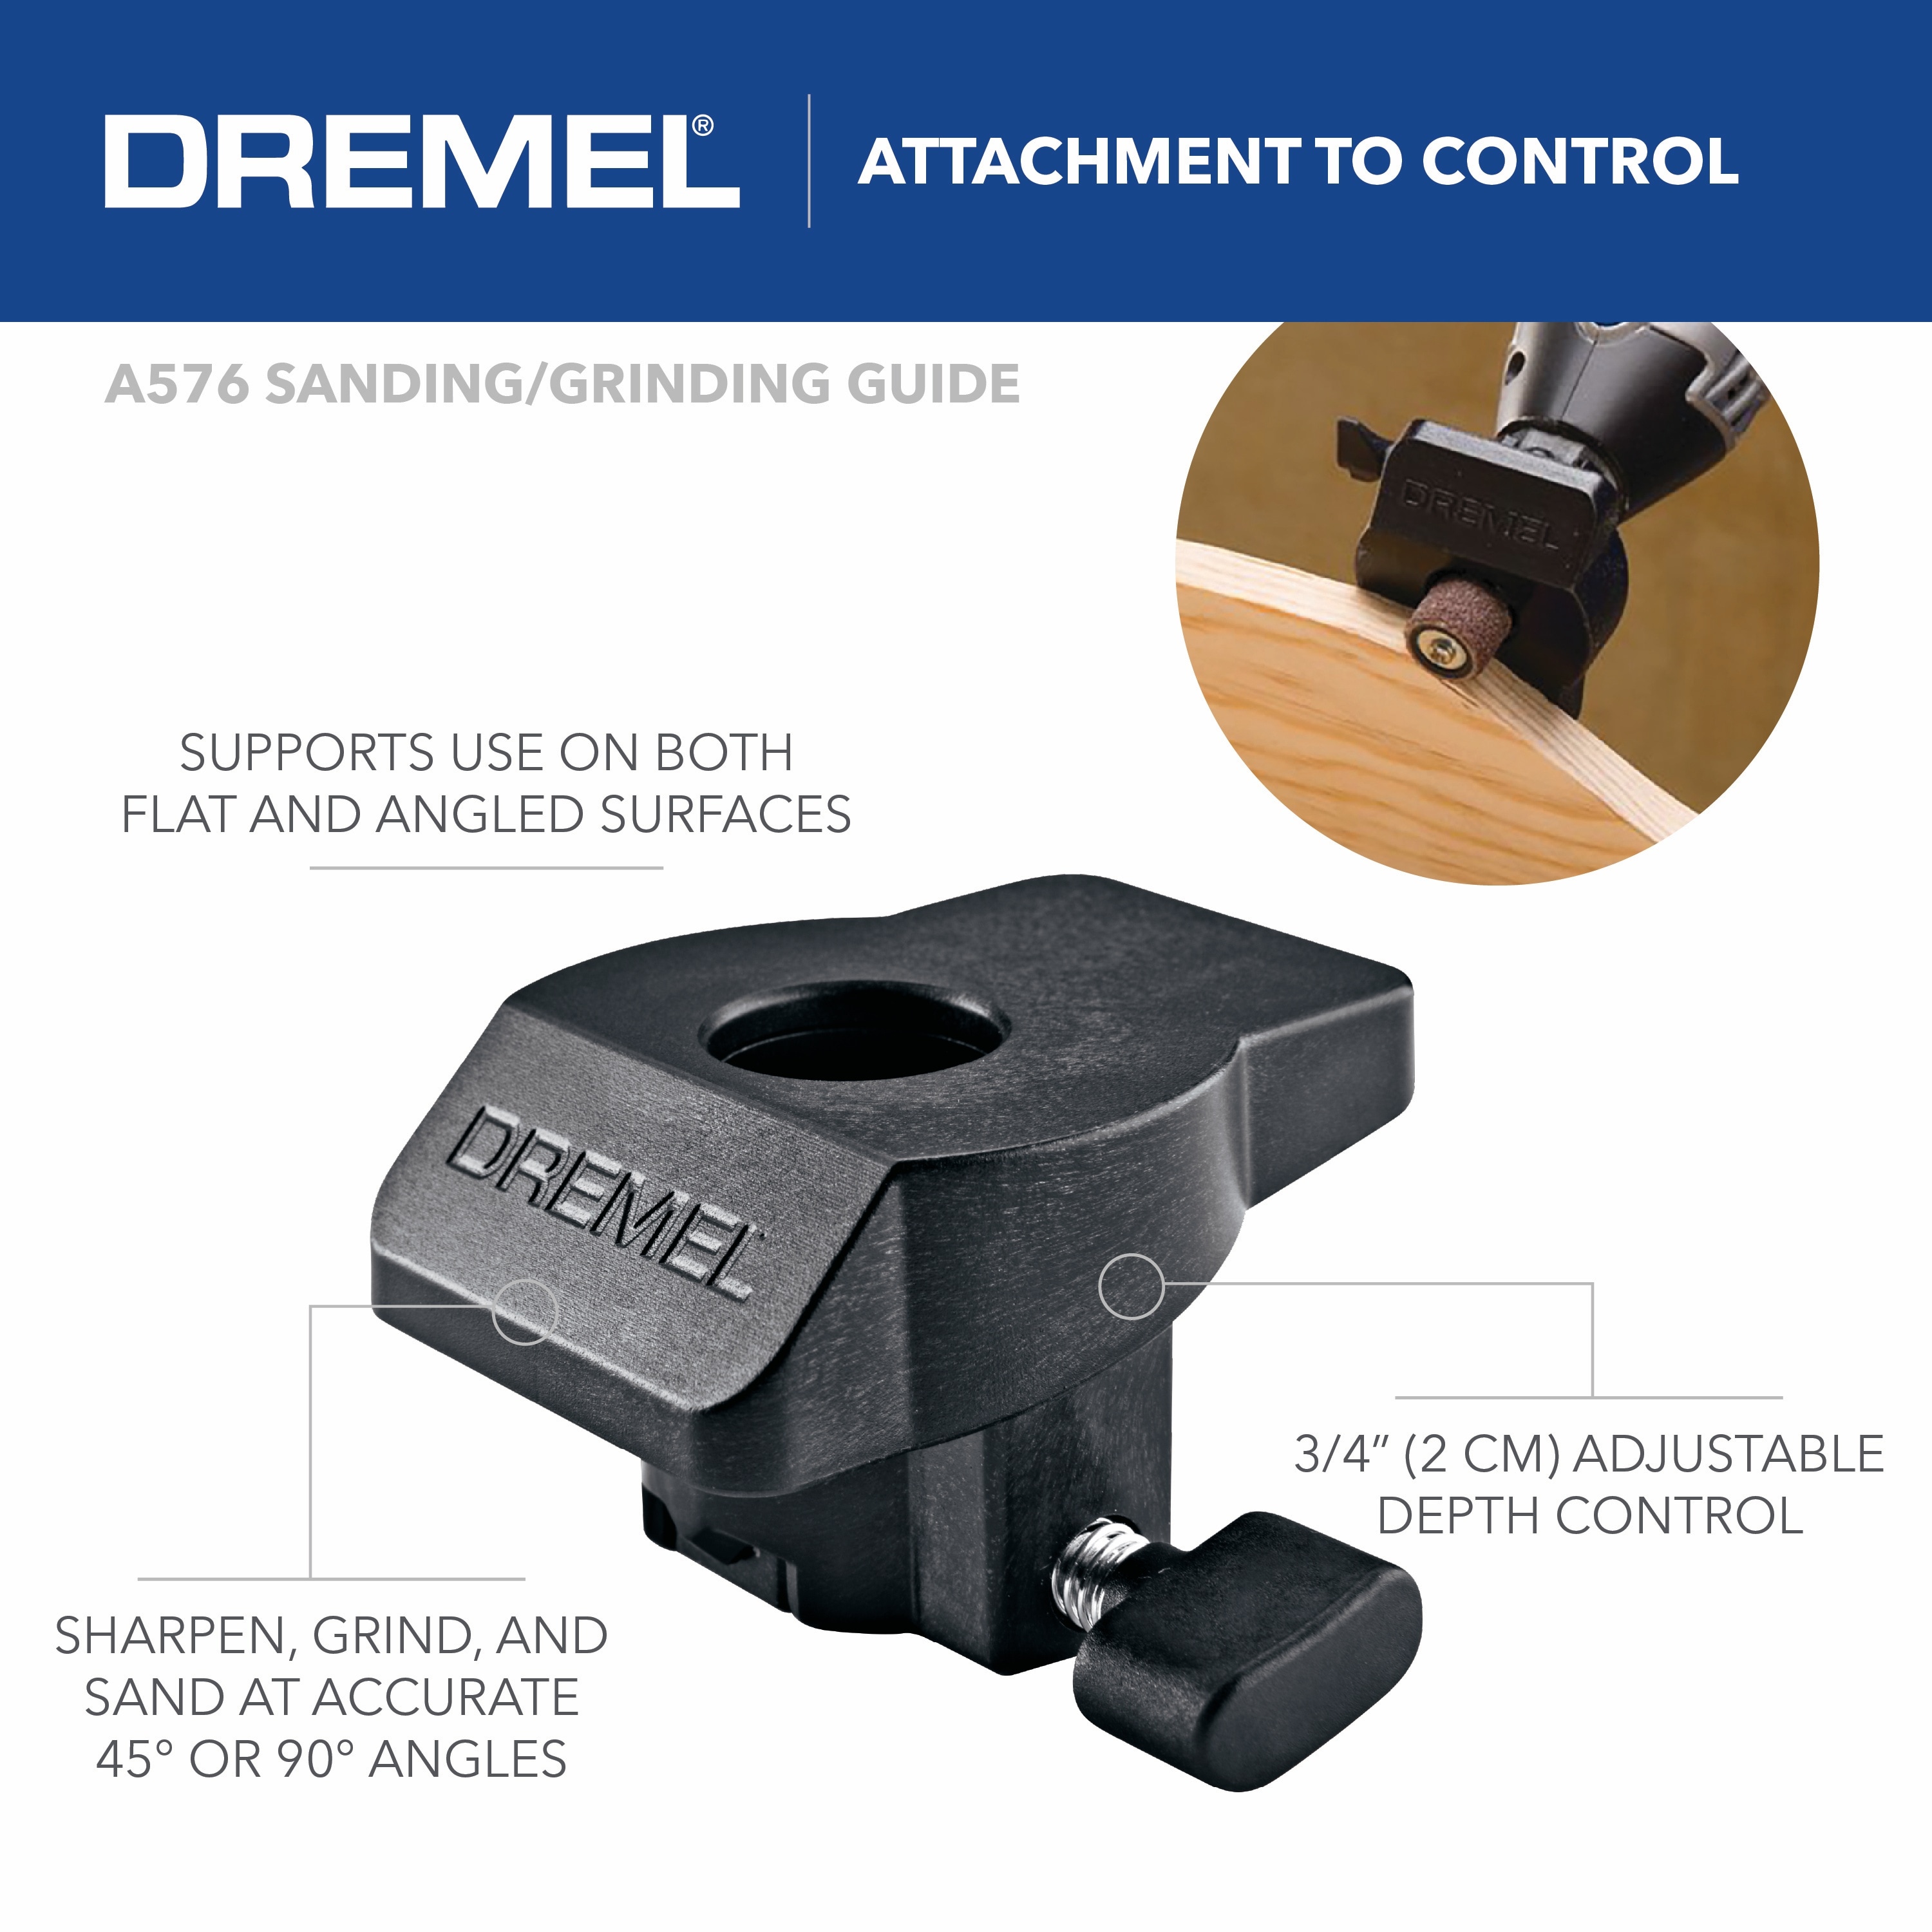 Dremel 4000 Variable-Speed Rotary Tool Kit w/ Storage Case & Accessory -  Bed Bath & Beyond - 32677133